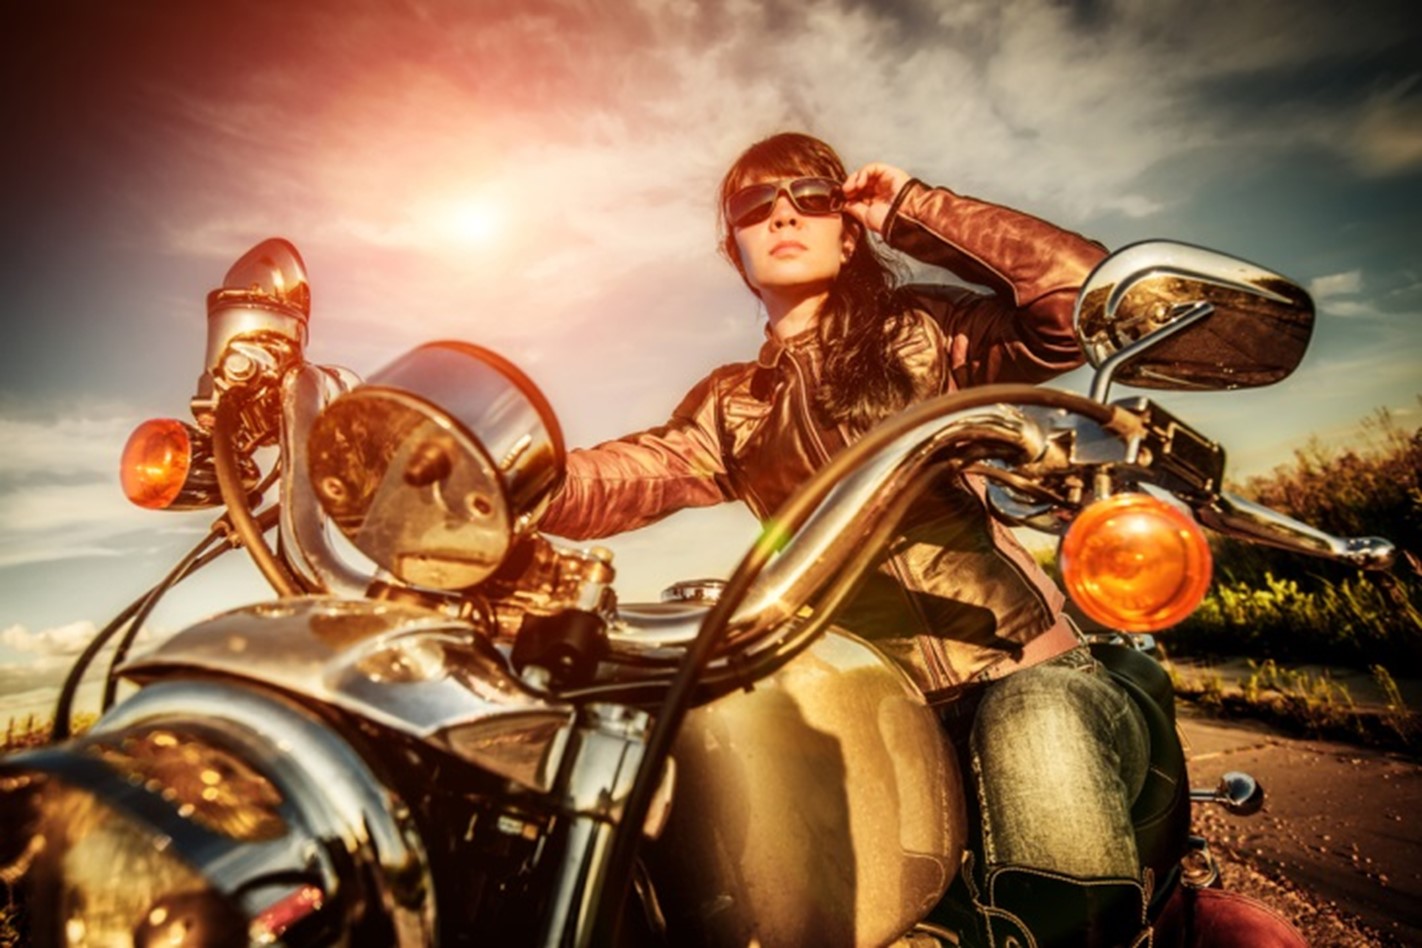 Women Motorcycling: How to Improve Your Skills